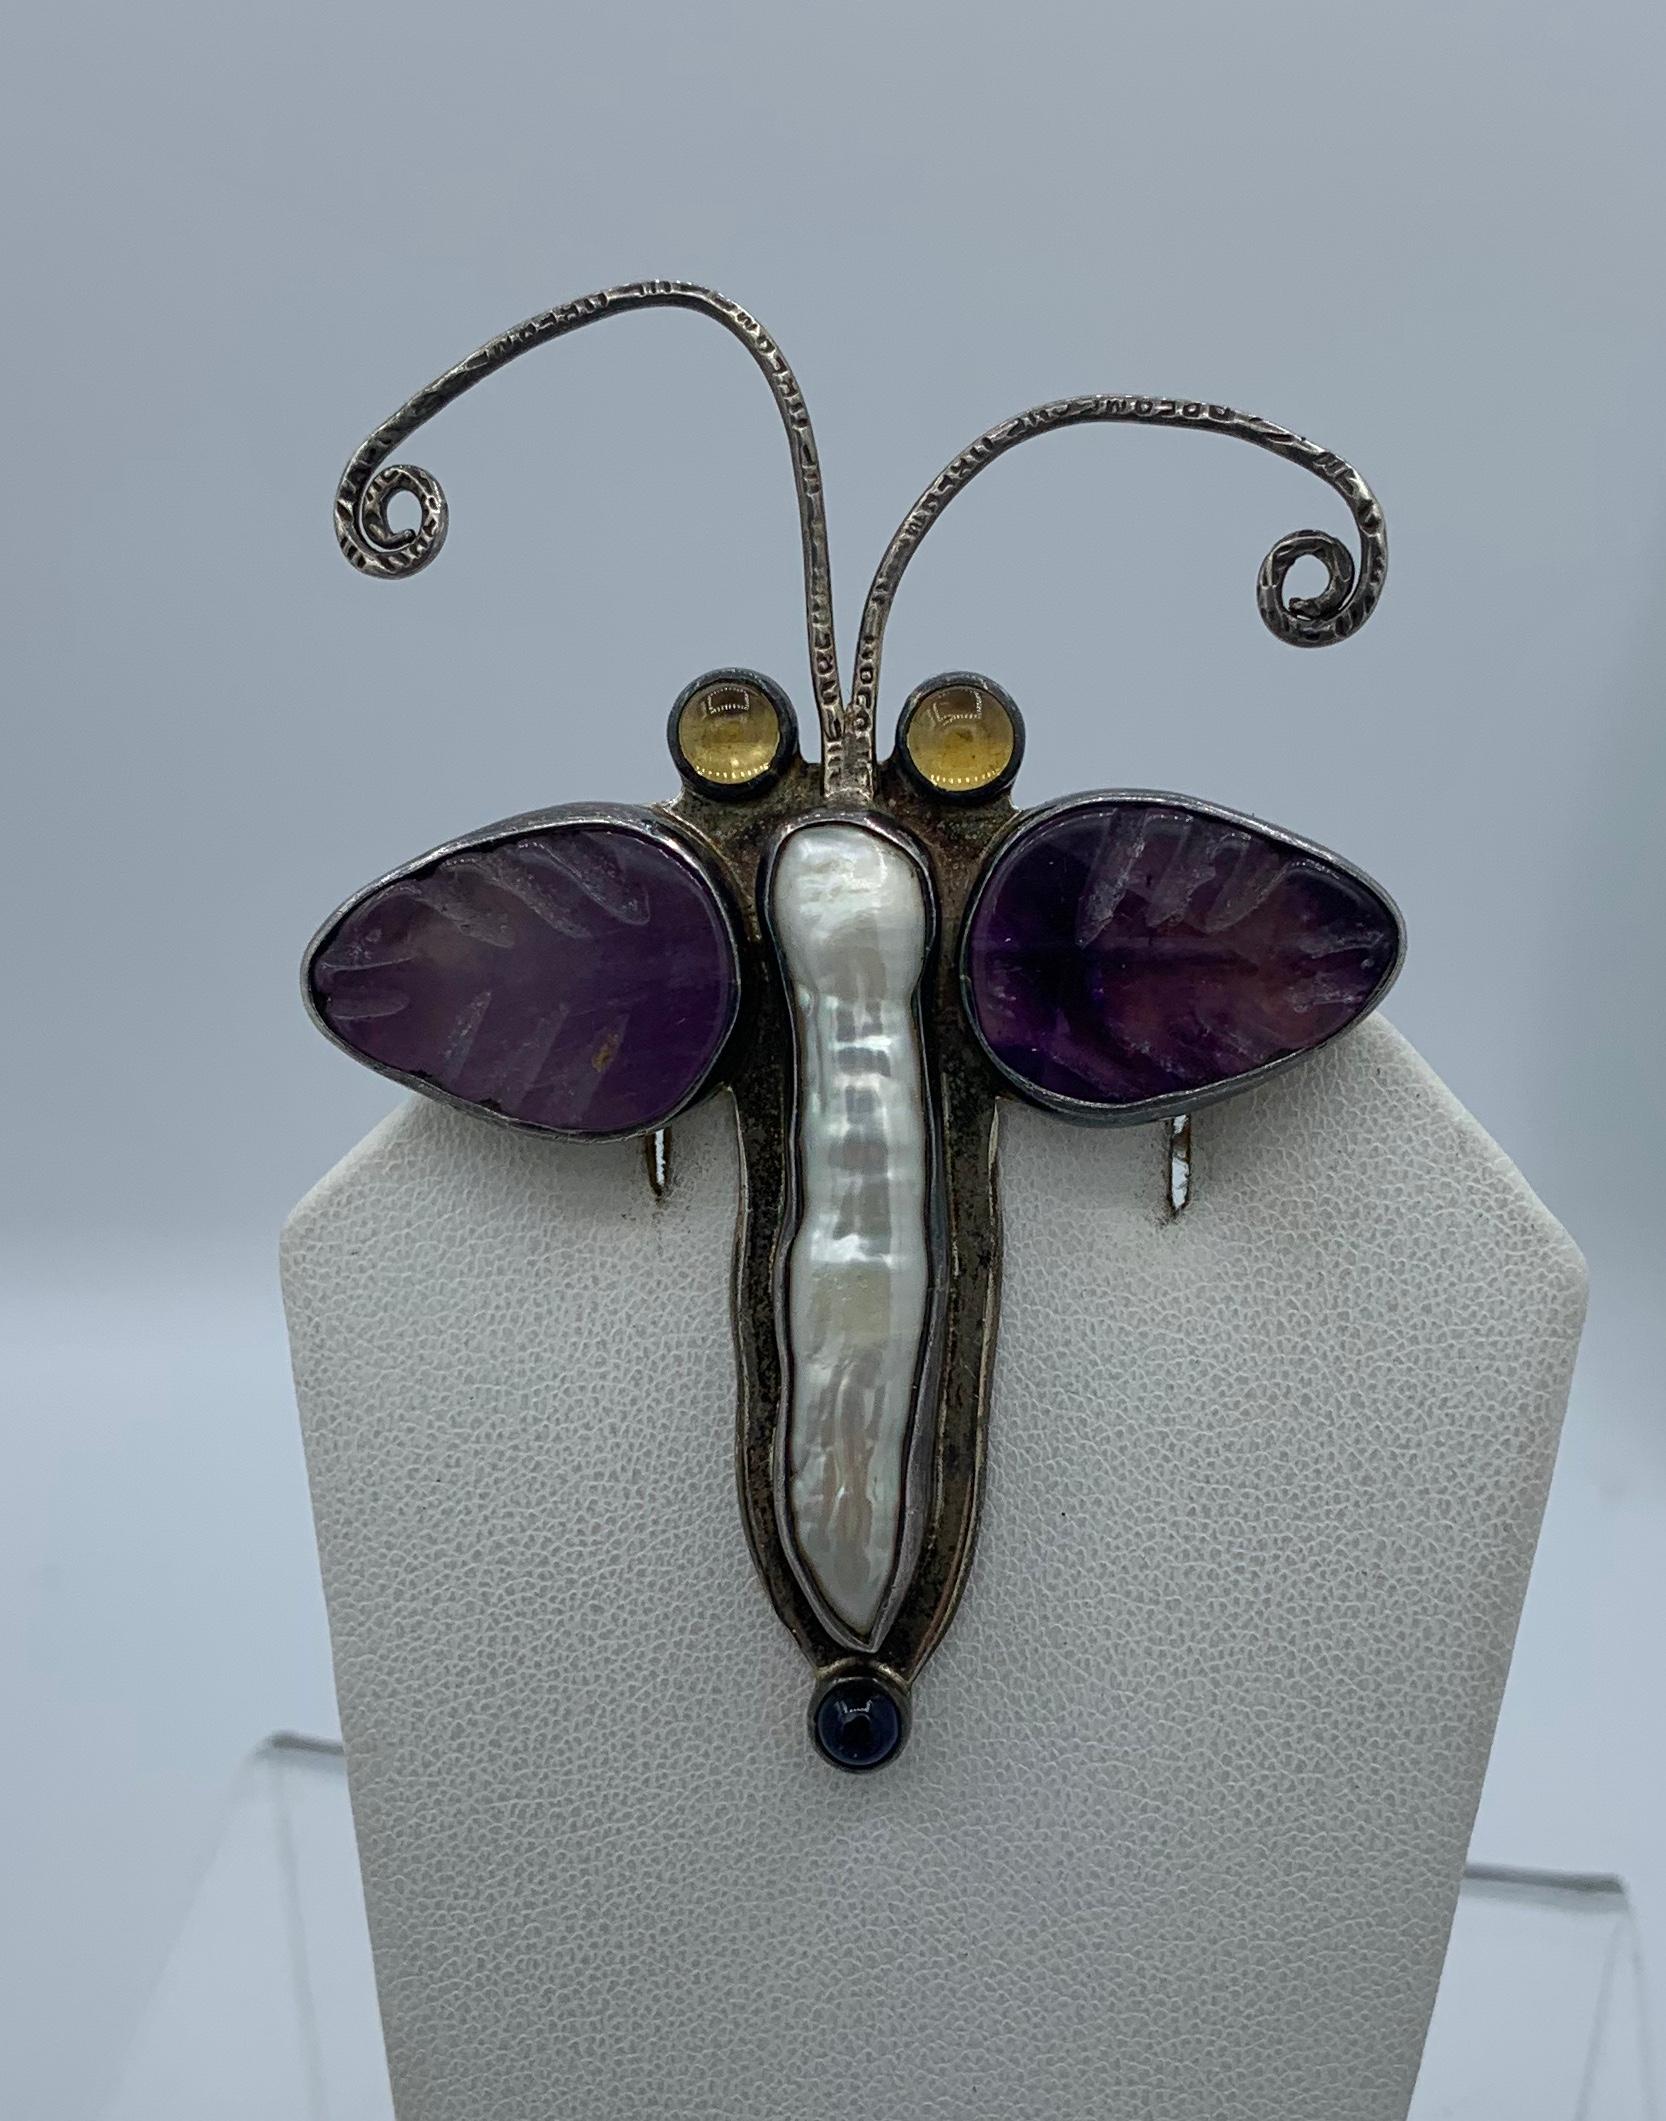 This is a stunning vintage Echo Of The Dreamer Pendant or Brooch in the form of a Butterfly or Moth with carved Amethyst Wings, a stunning Pearl body, Lapis Lazuli at the tail and in Sterling Silver.  The wonderful insect can be worn as a pendant or